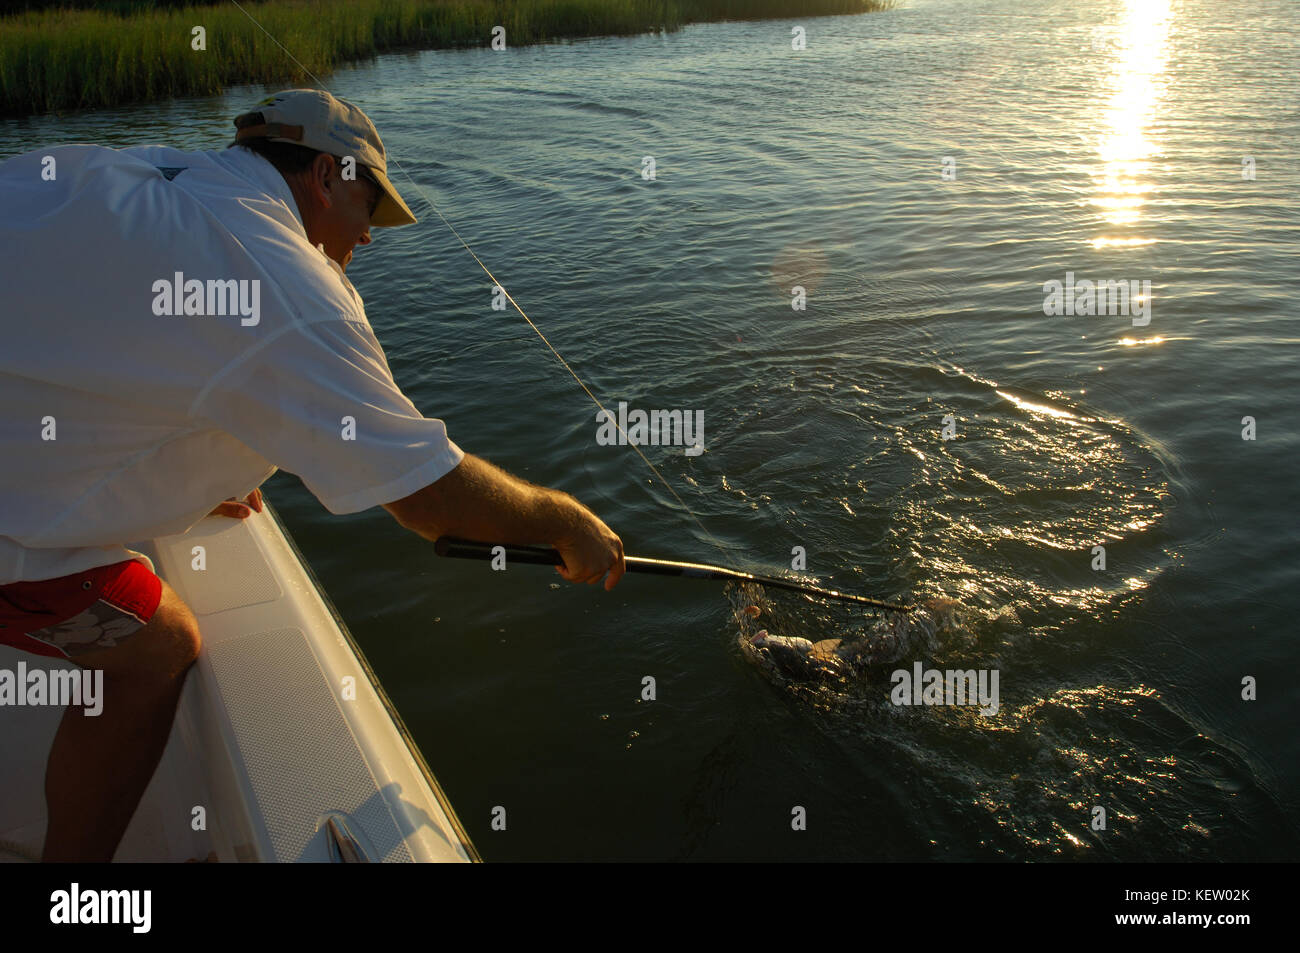 A fisherman netting a redfish or red drum while fishing the bay near Port Aransas Texas Stock Photo